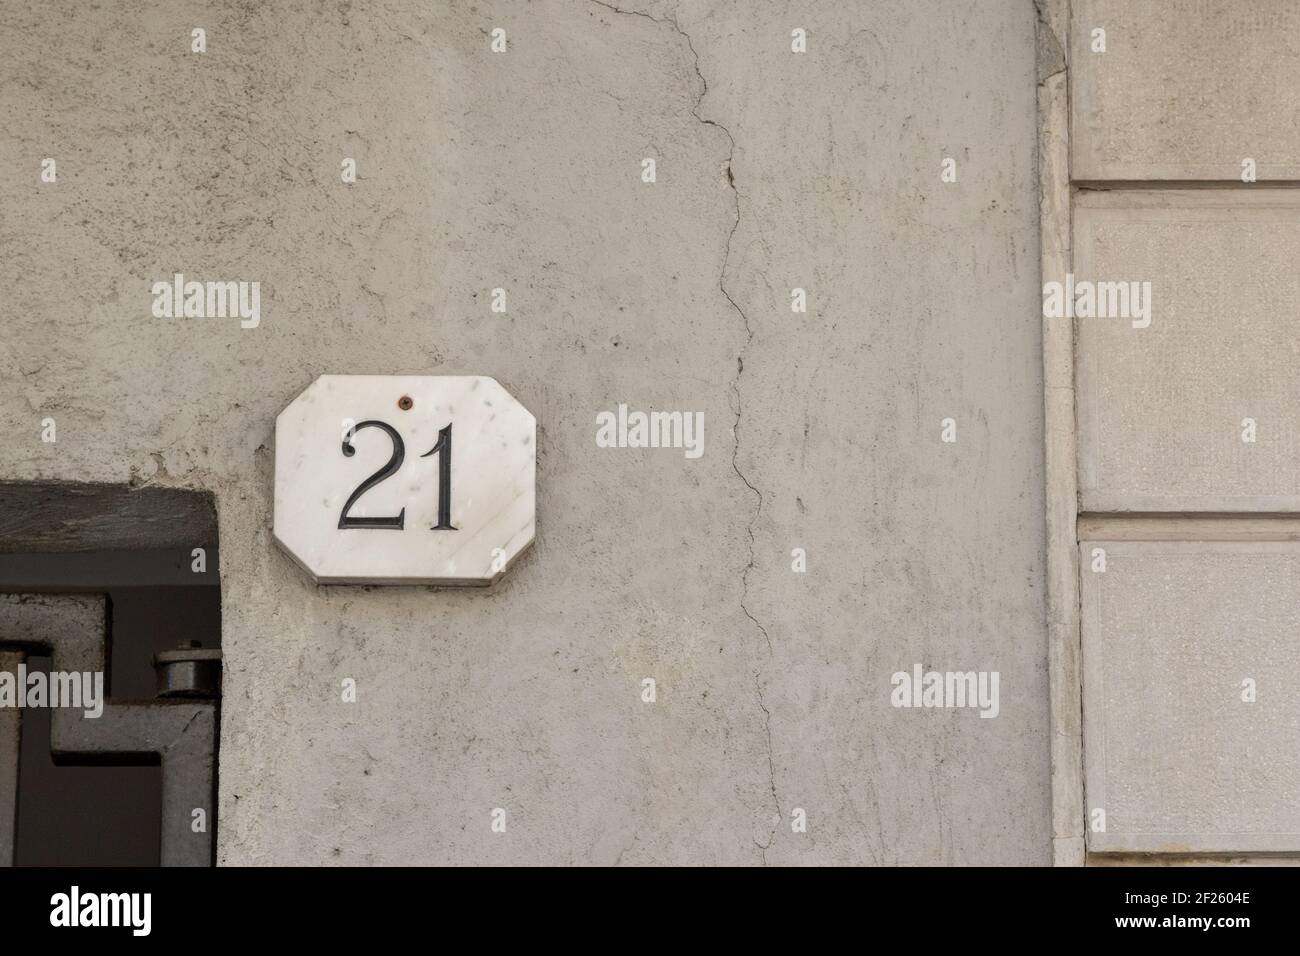 21 ancient house number, concept number Stock Photo